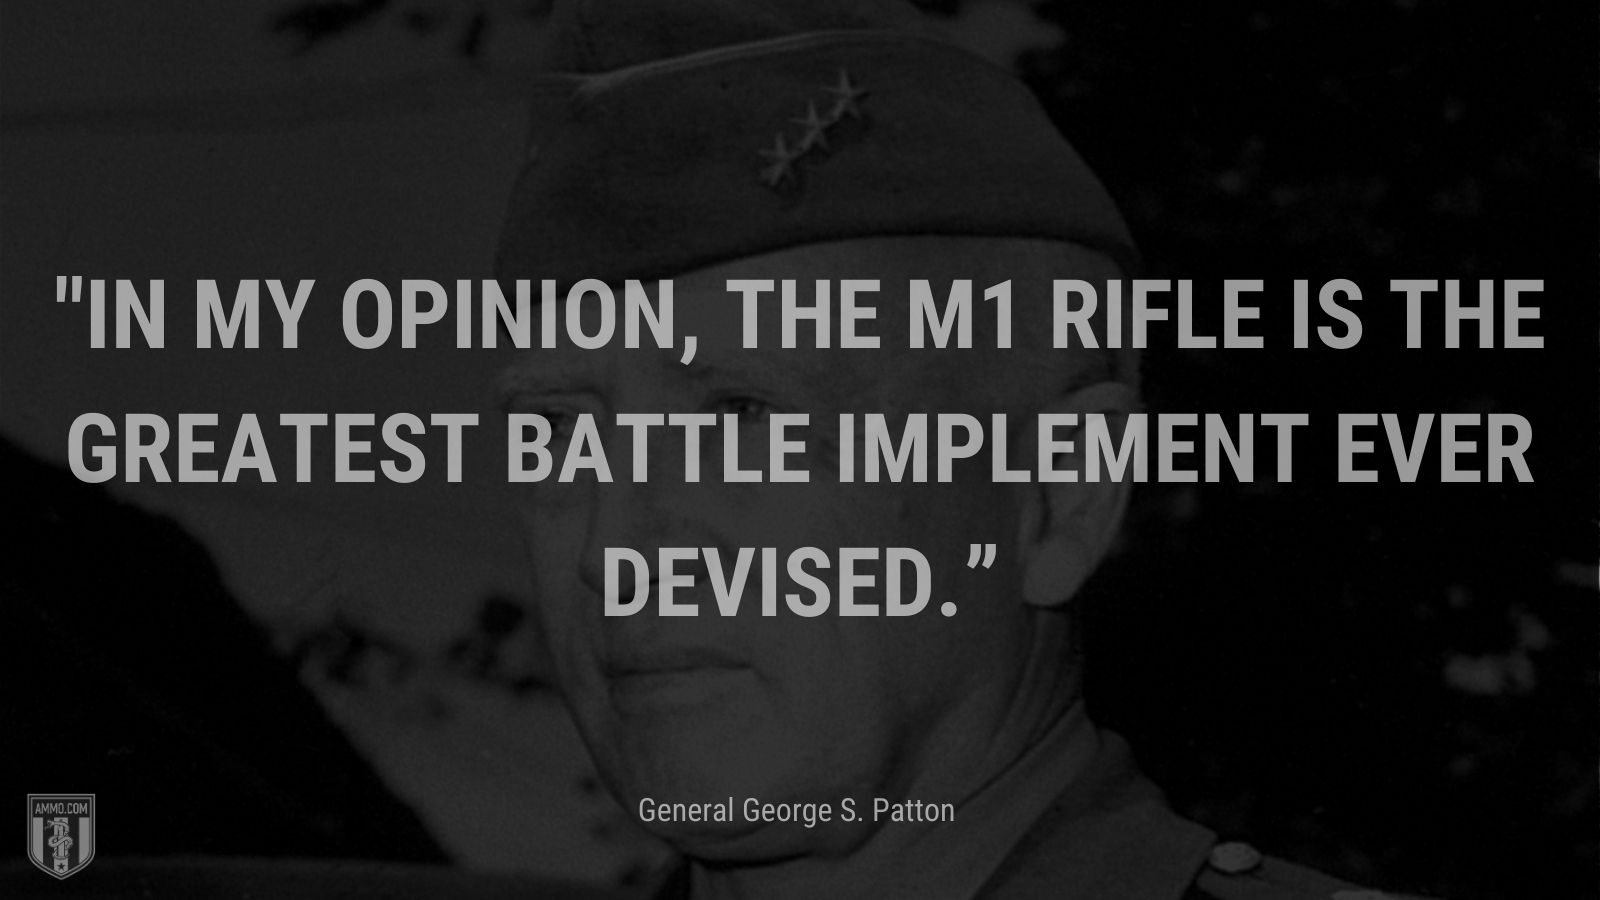 “In my opinion, the M1 rifle is the greatest battle implement ever devised.” - General George S. Pattone